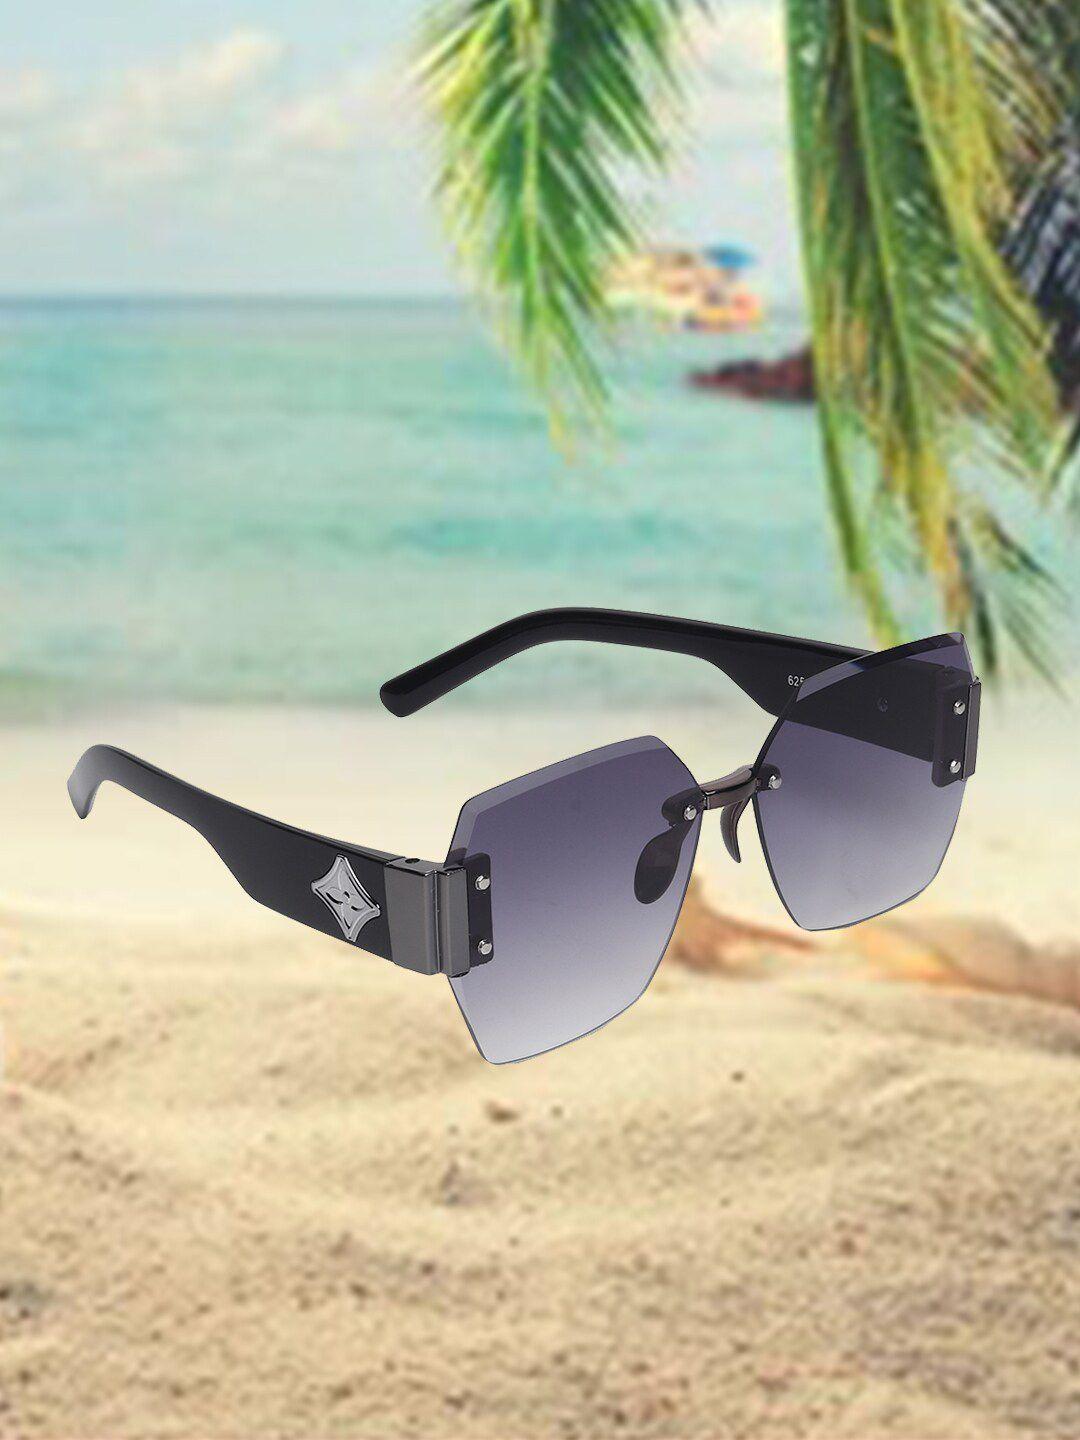 celebrity sunglasses lens & rimless square sunglasses with uv protected lens clsg-625-07